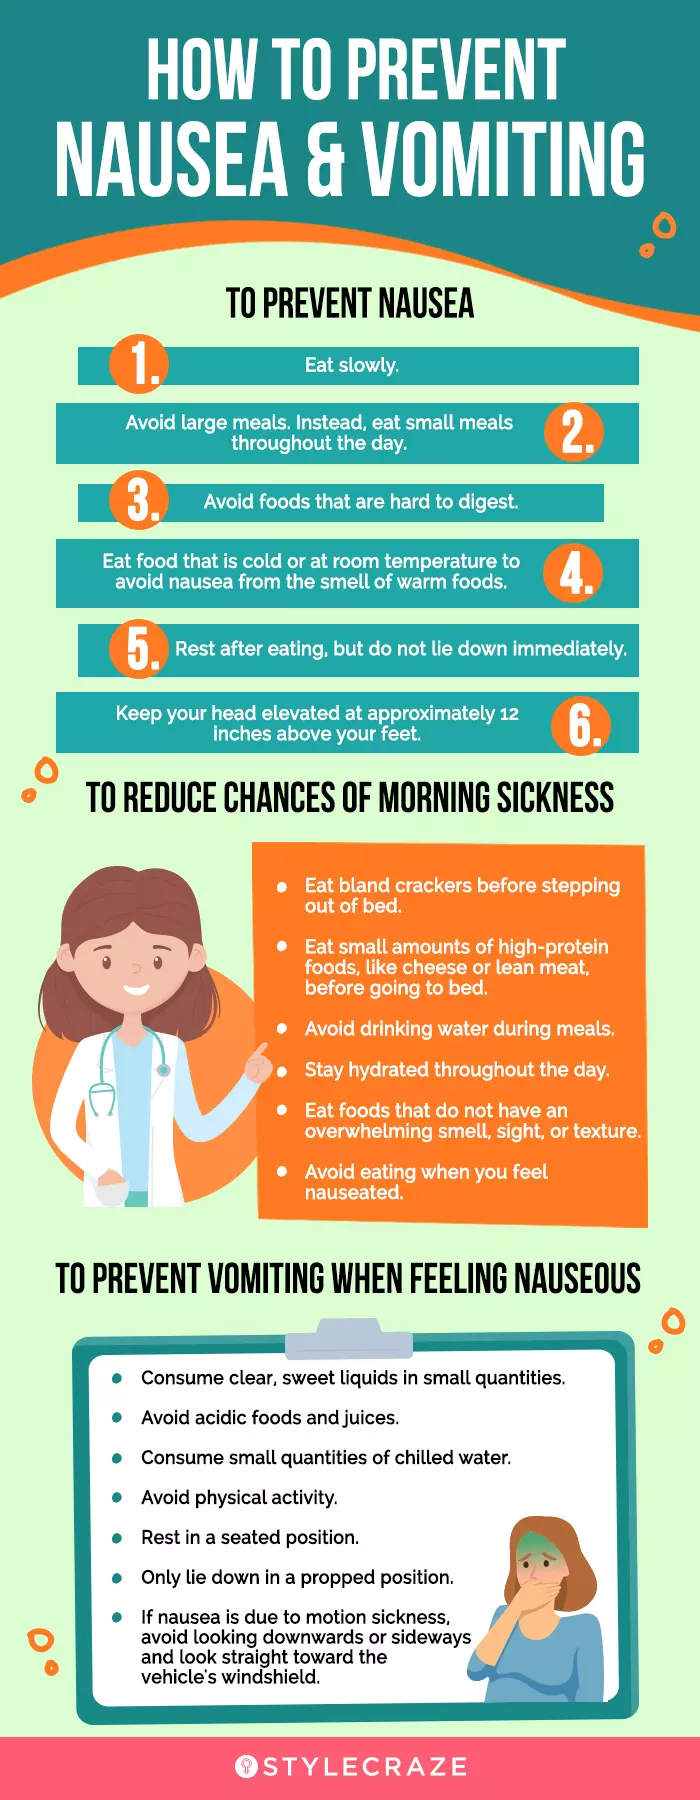 how to prevent nausea and vomiting (infographic)